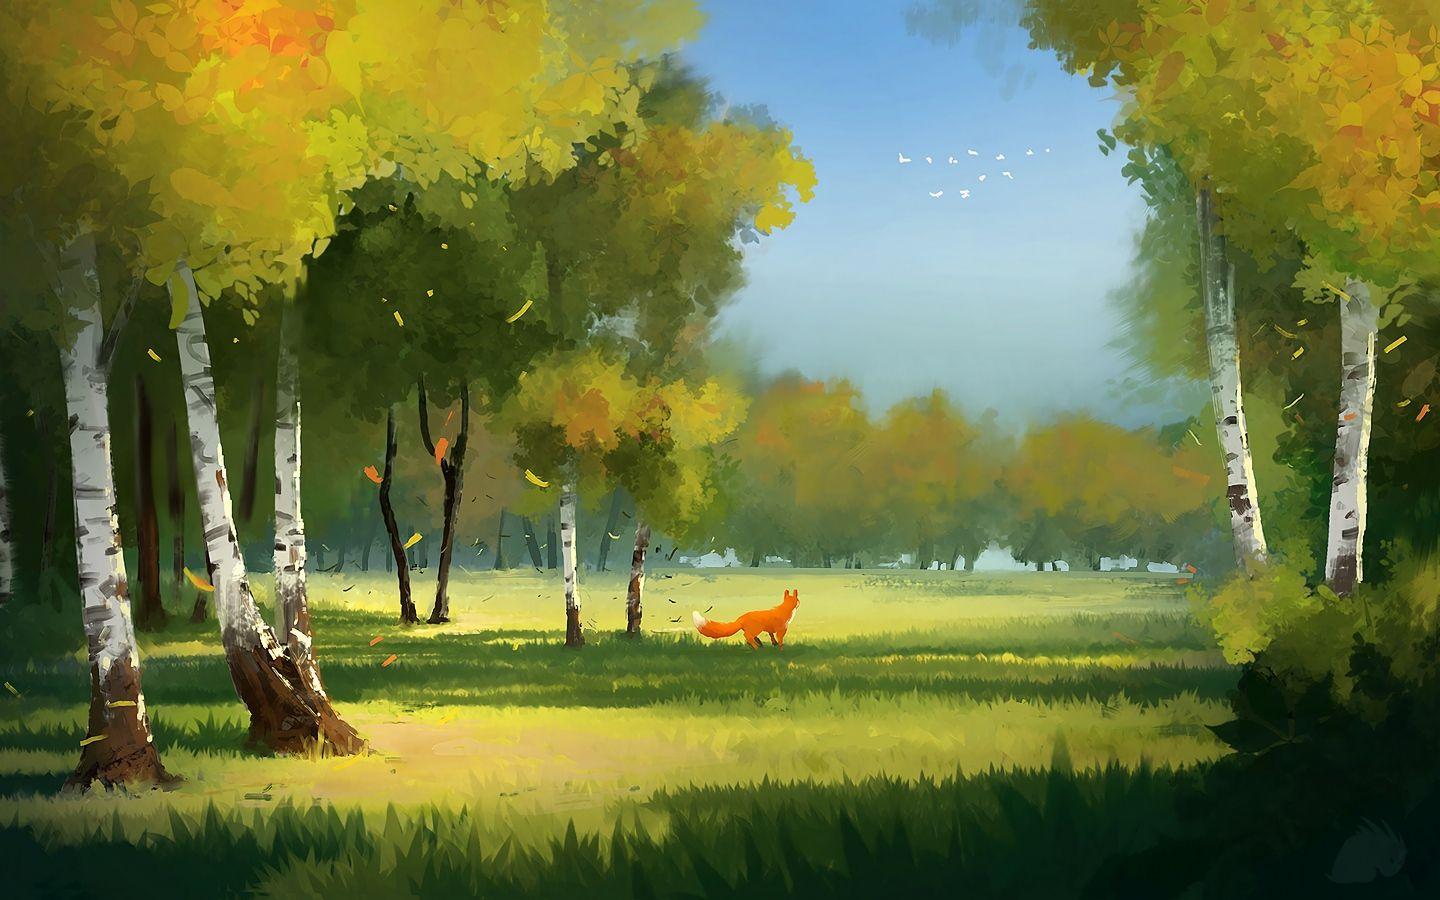 Download wallpaper 1440x900 forest, fox, art, glade, trees